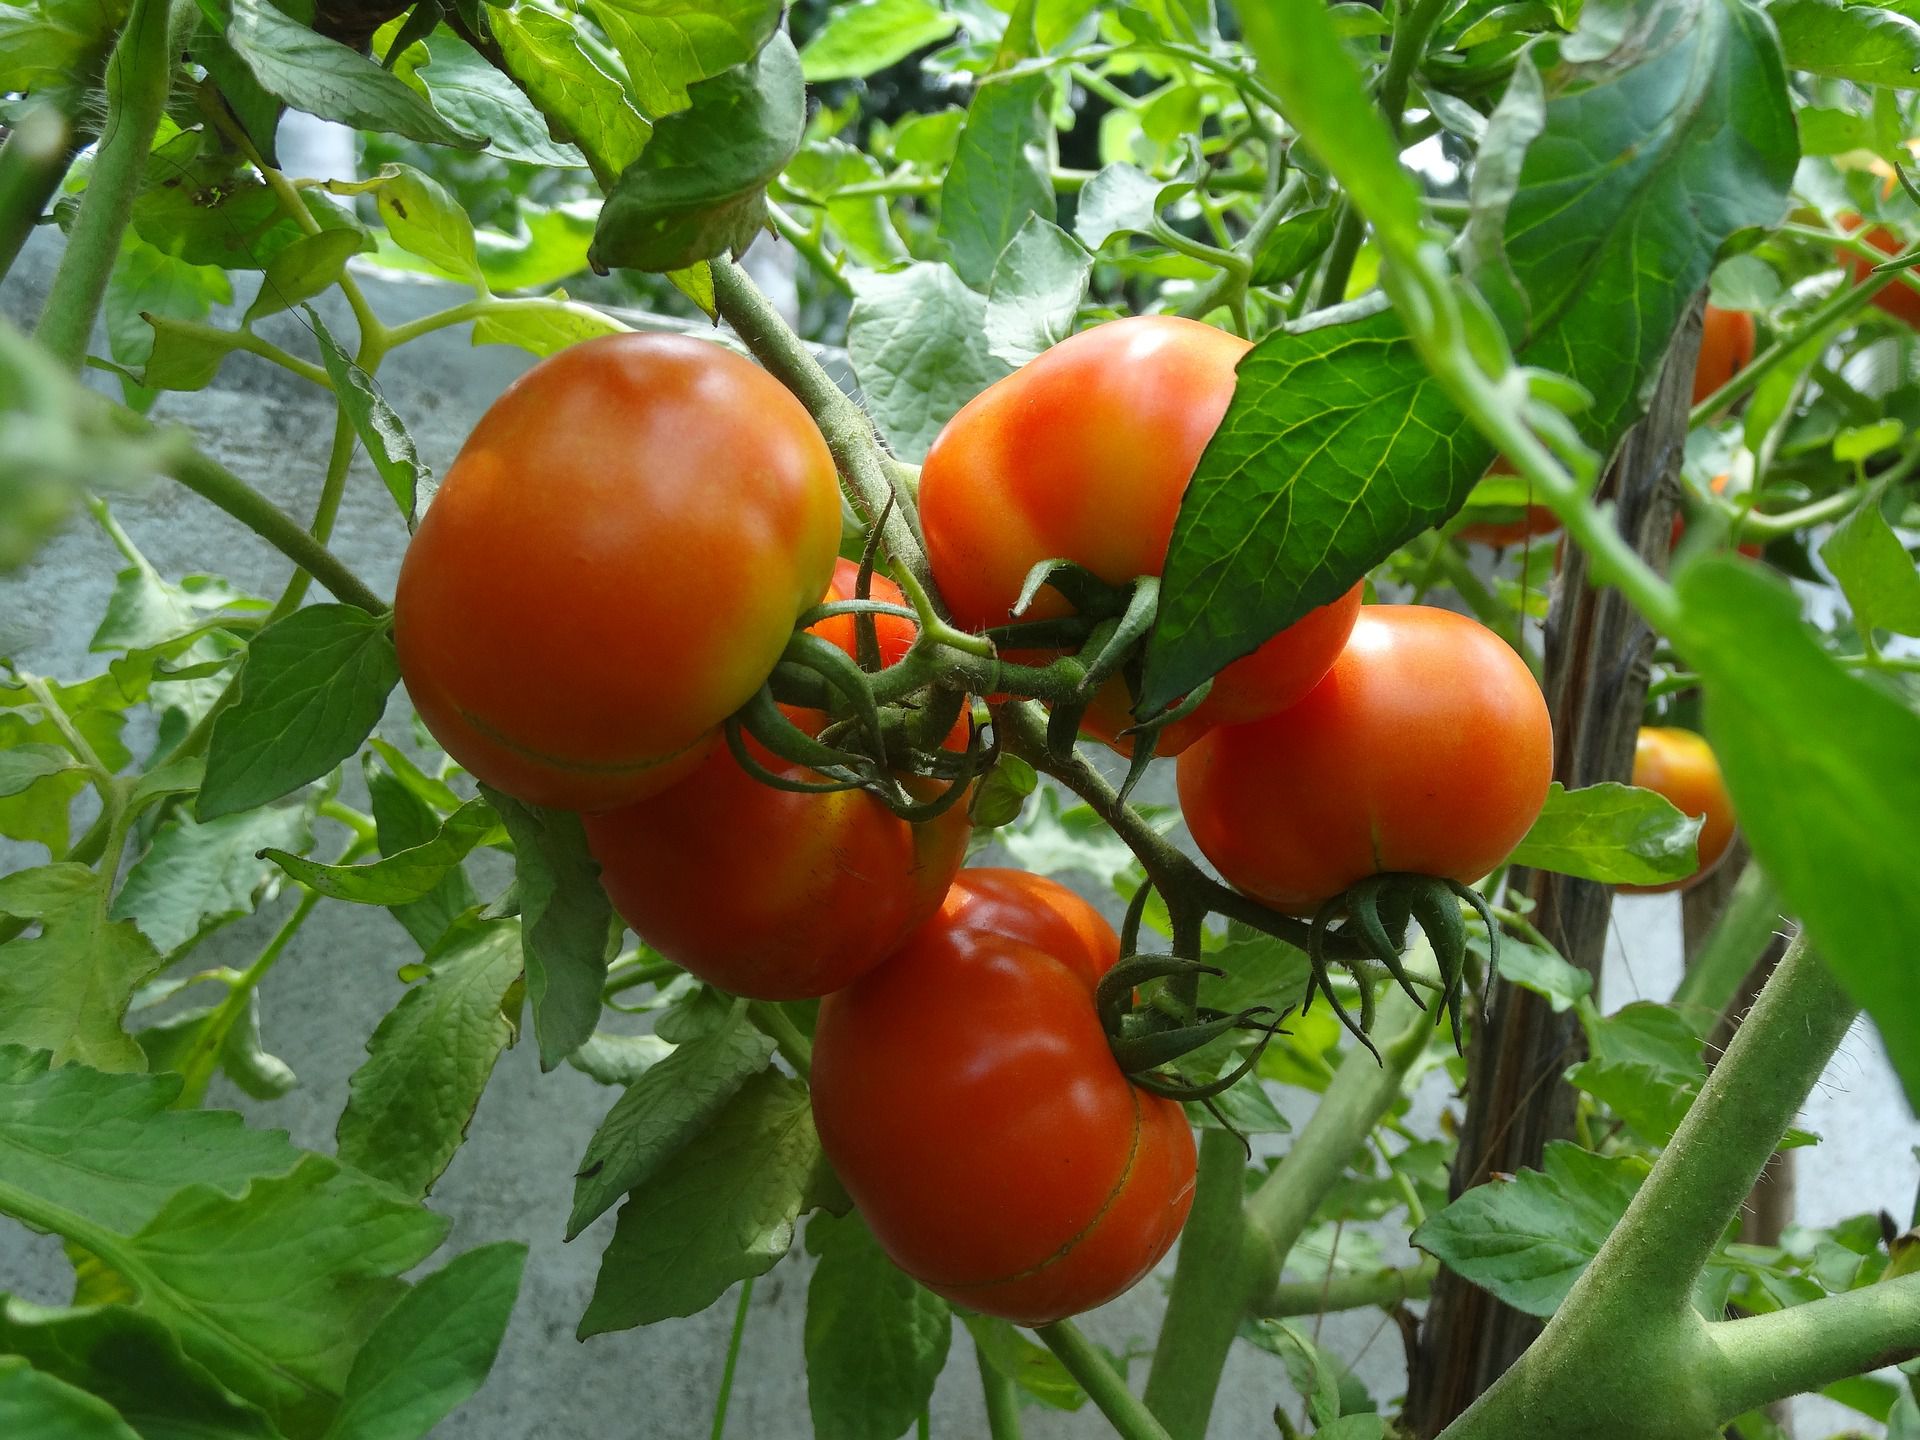 Why do tomatoes crack as they ripen?